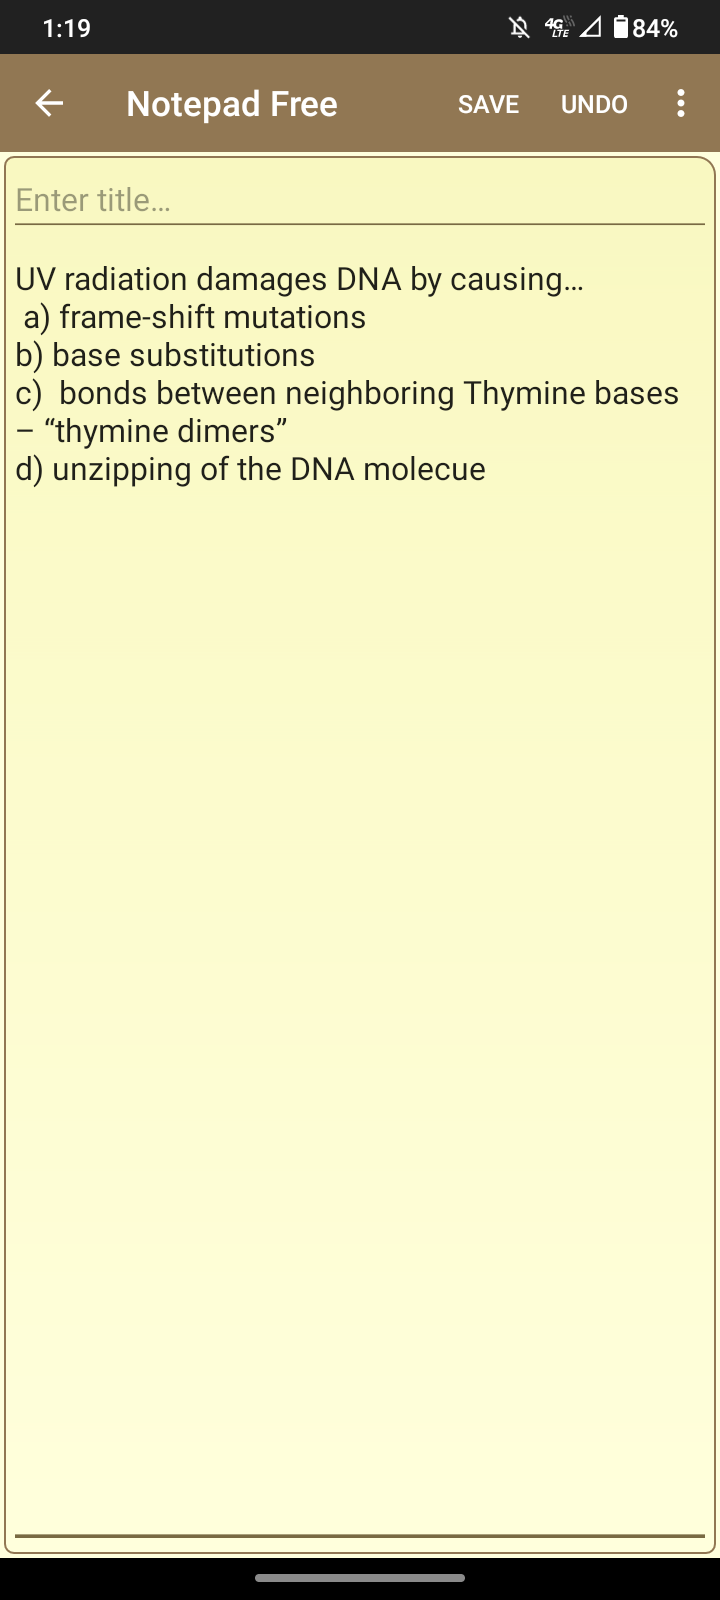 1:19
Notepad Free
Enter title...
484%
SAVE UNDO
UV radiation damages DNA by causing...
a) frame-shift mutations
b) base substitutions
c) bonds between neighboring Thymine bases
"thymine dimers"
d) unzipping of the DNA molecue